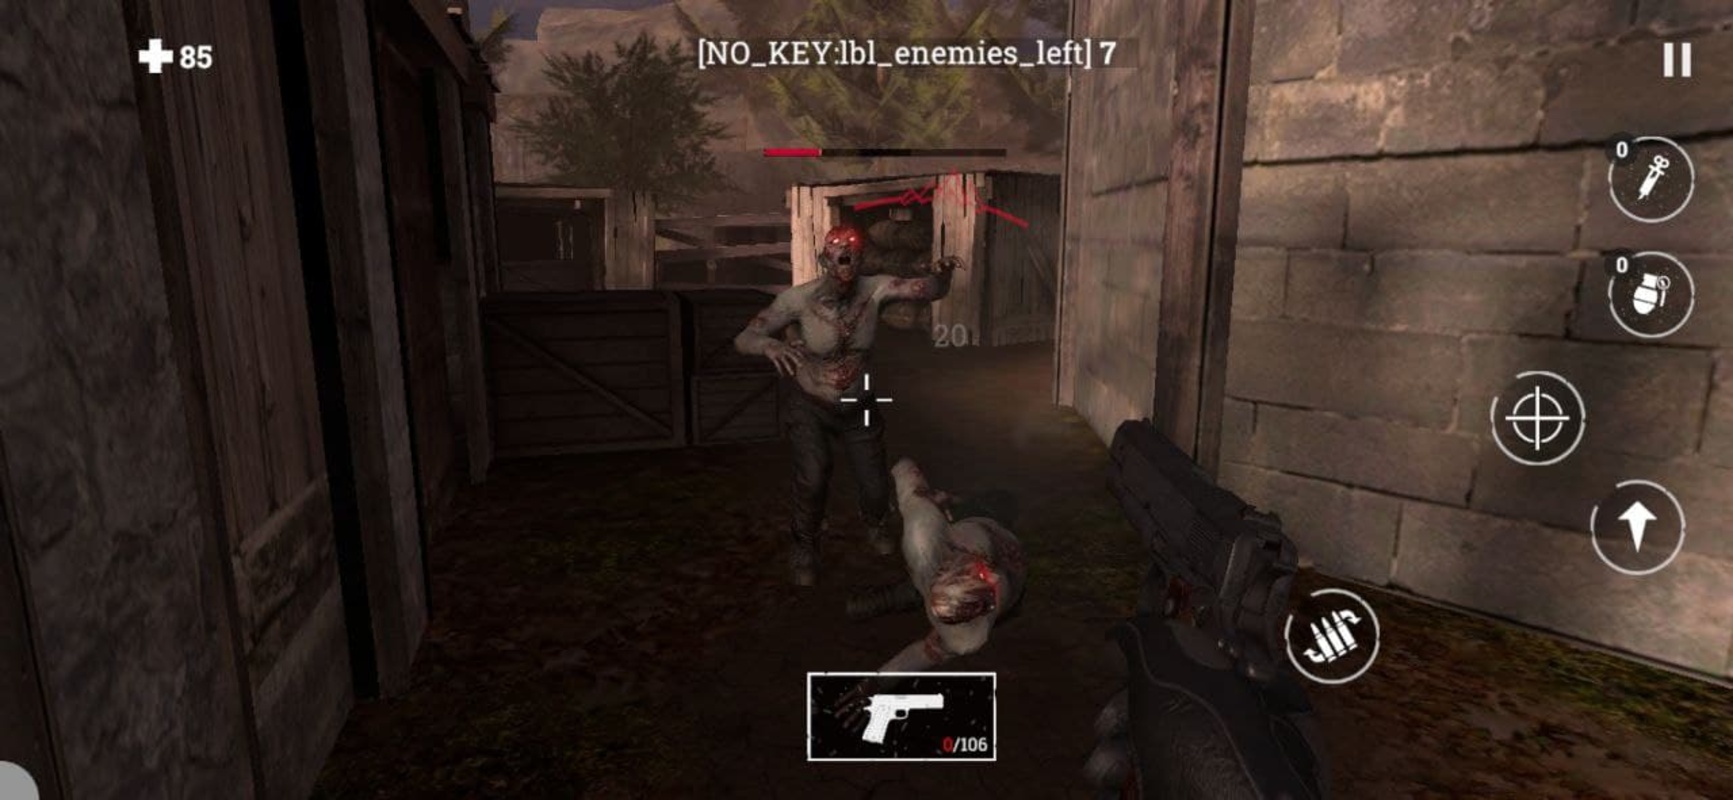 Crossfire: Survival Zombie Shooter 1.0.8 APK for Android Screenshot 3